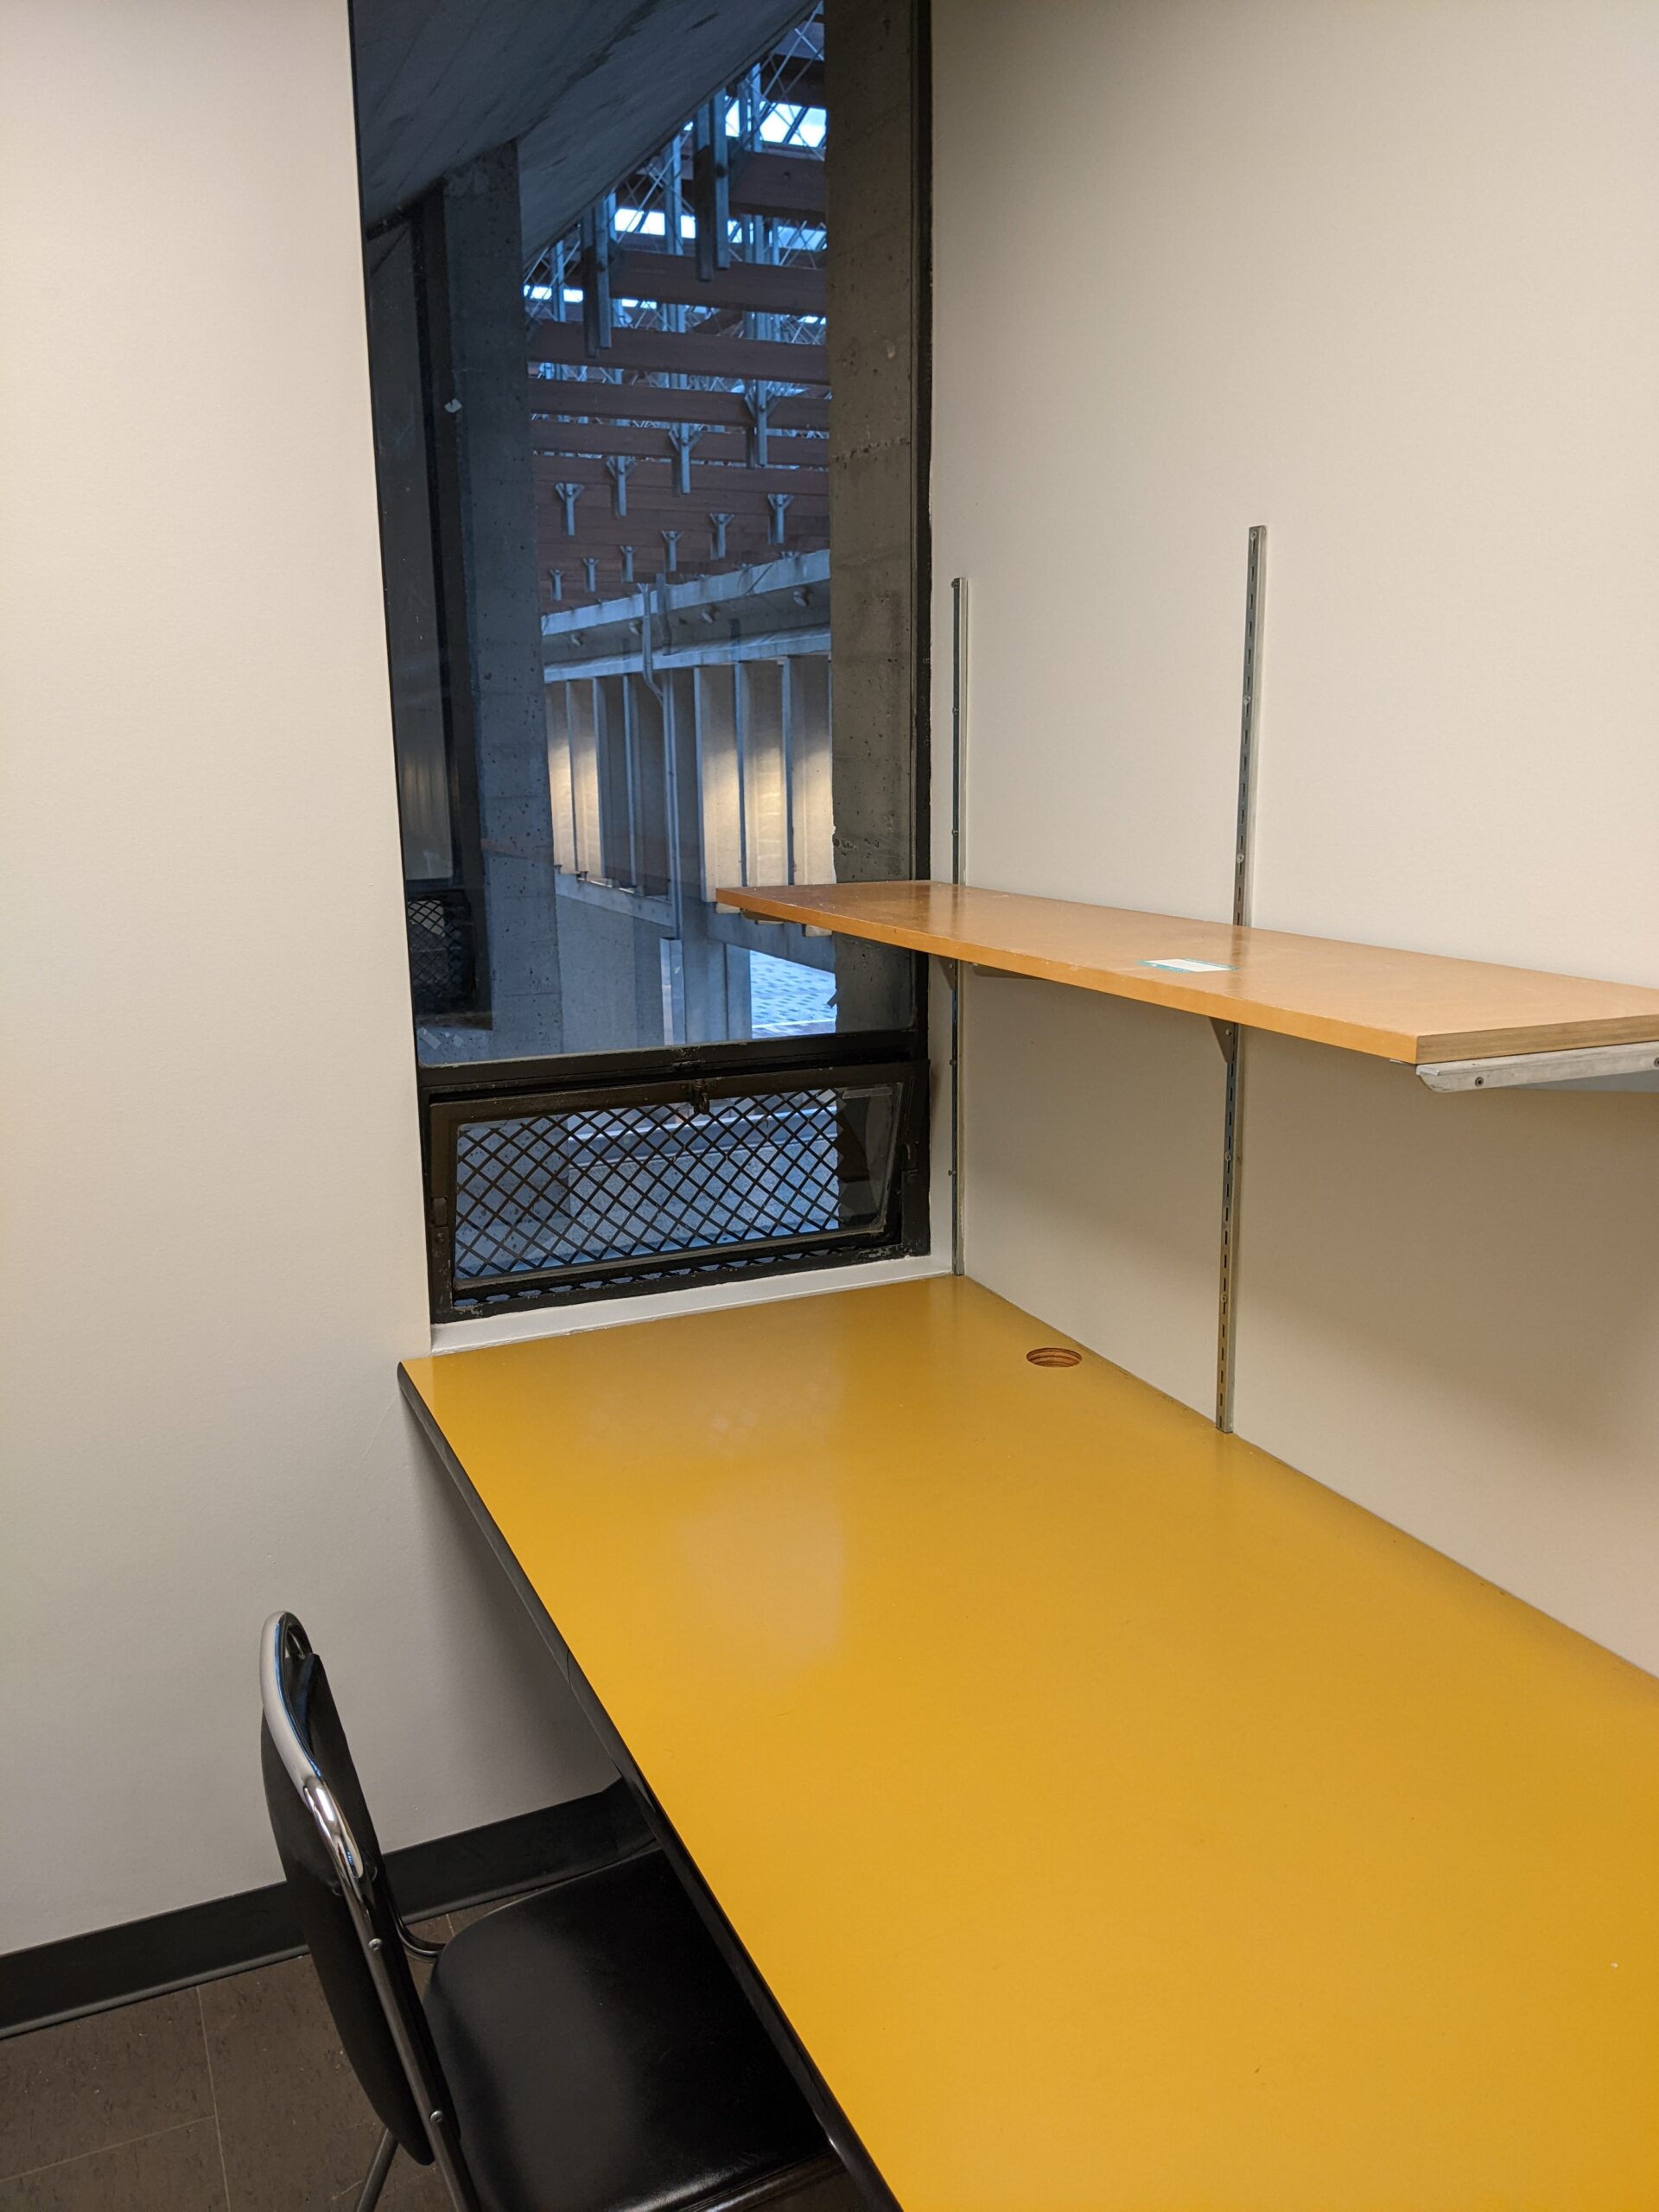 A study room, as described in the piece. The table is broad, and a window looks out from the side of the room.